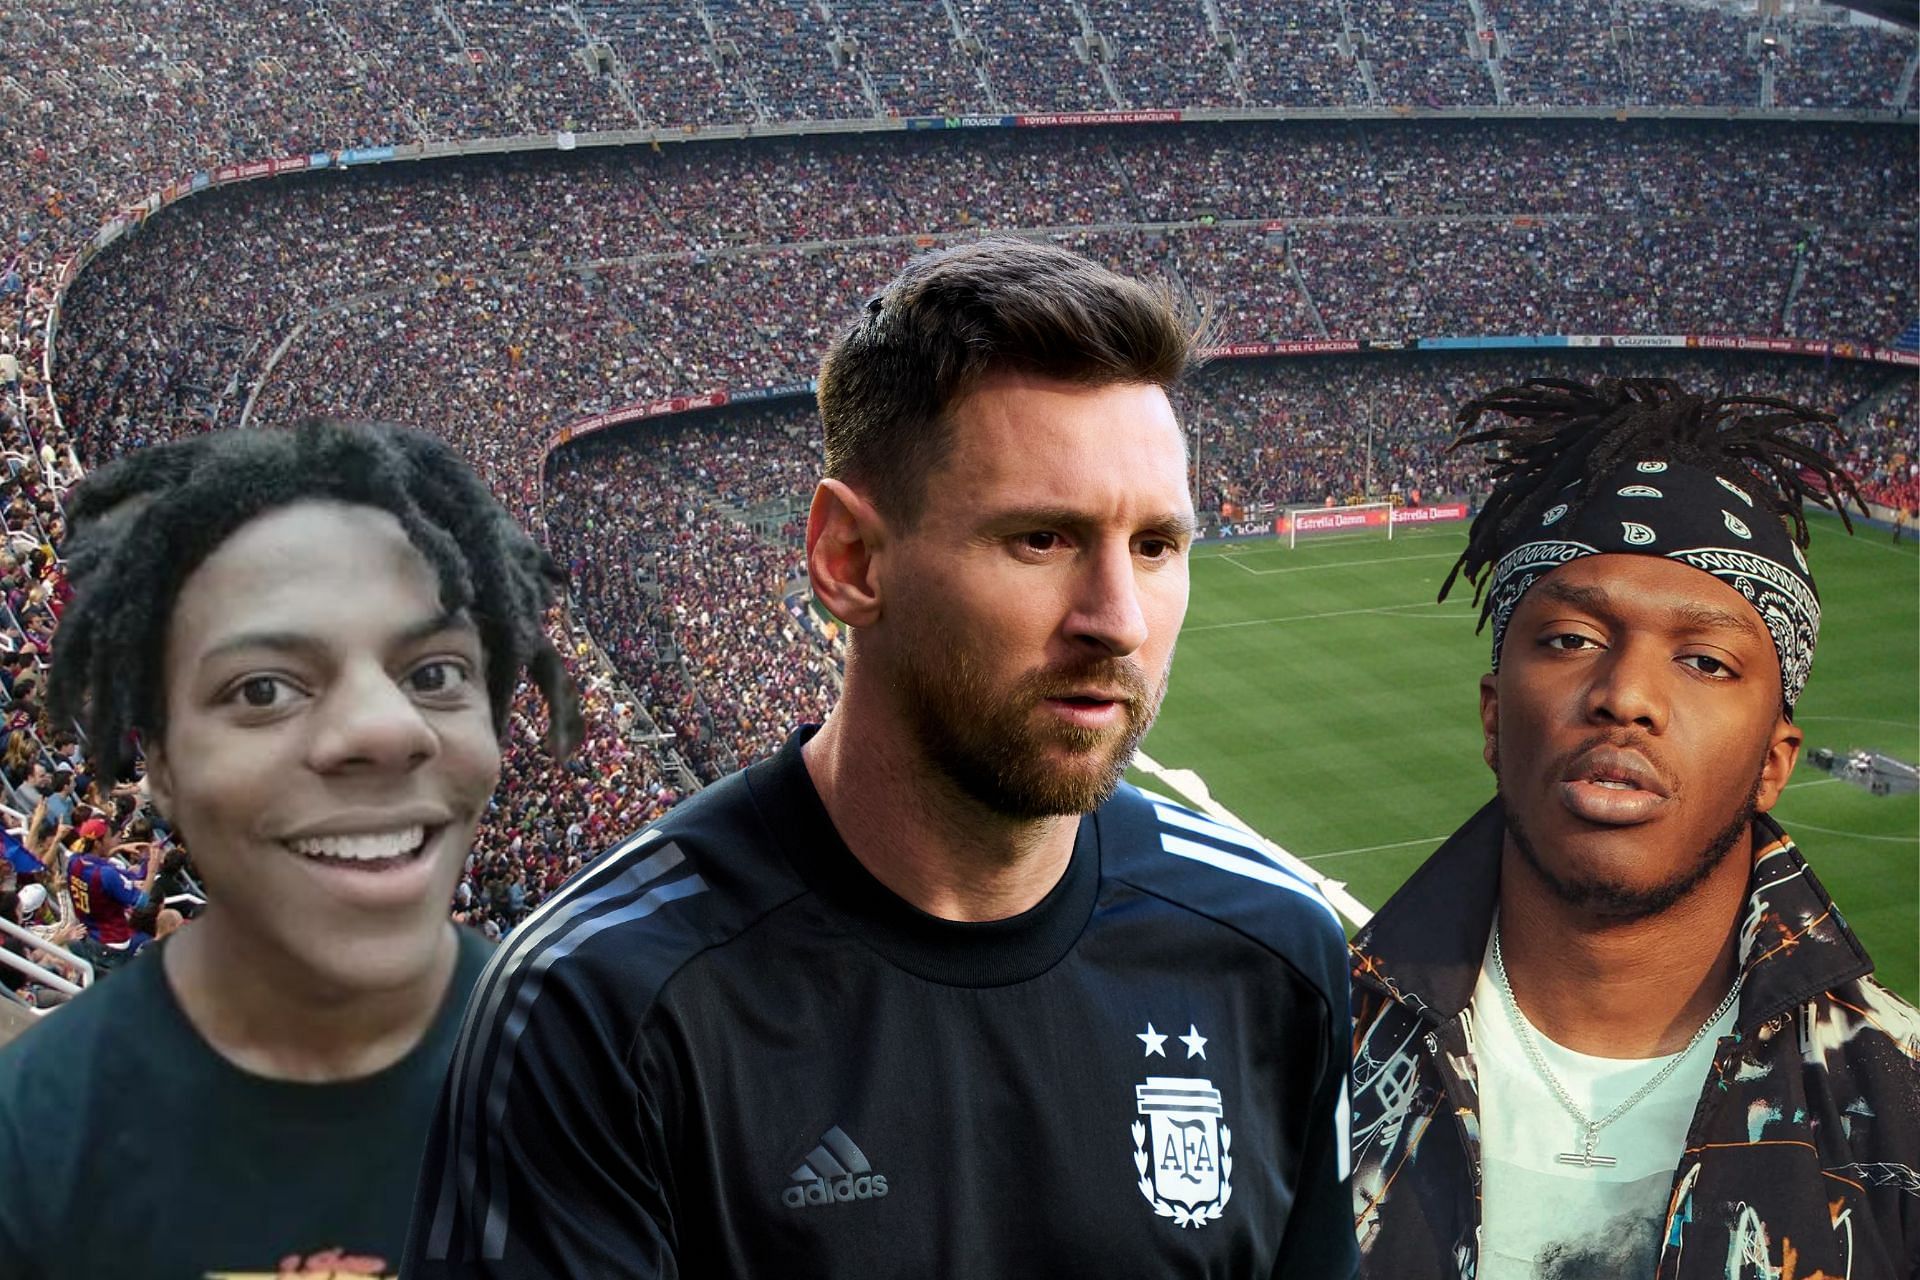 IShowSpeed reacts to KSI getting signed Messi shirt